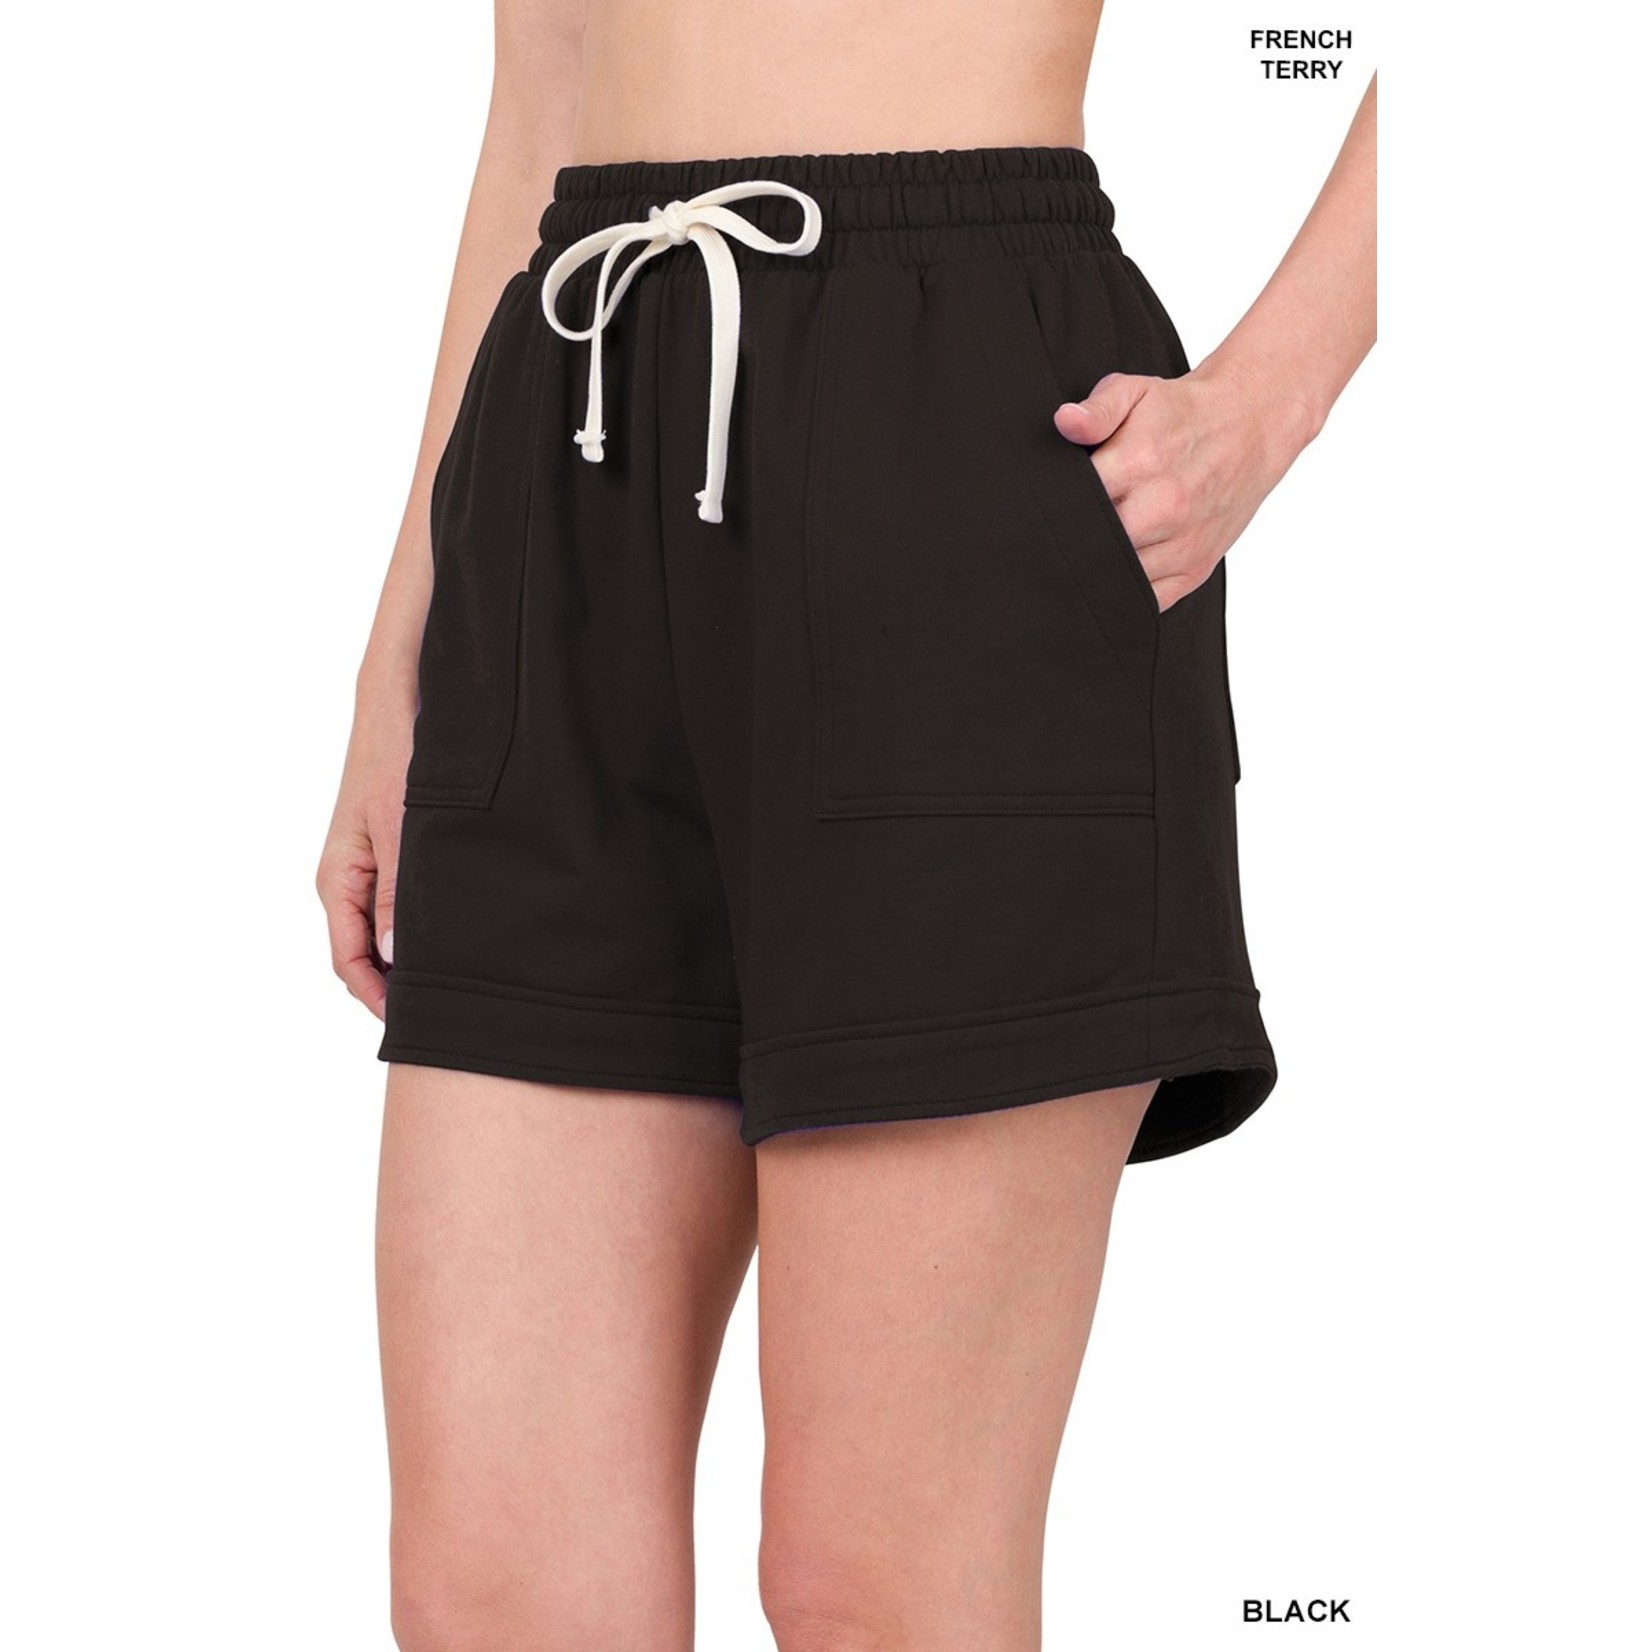 The Rebecca French Terry Shorts